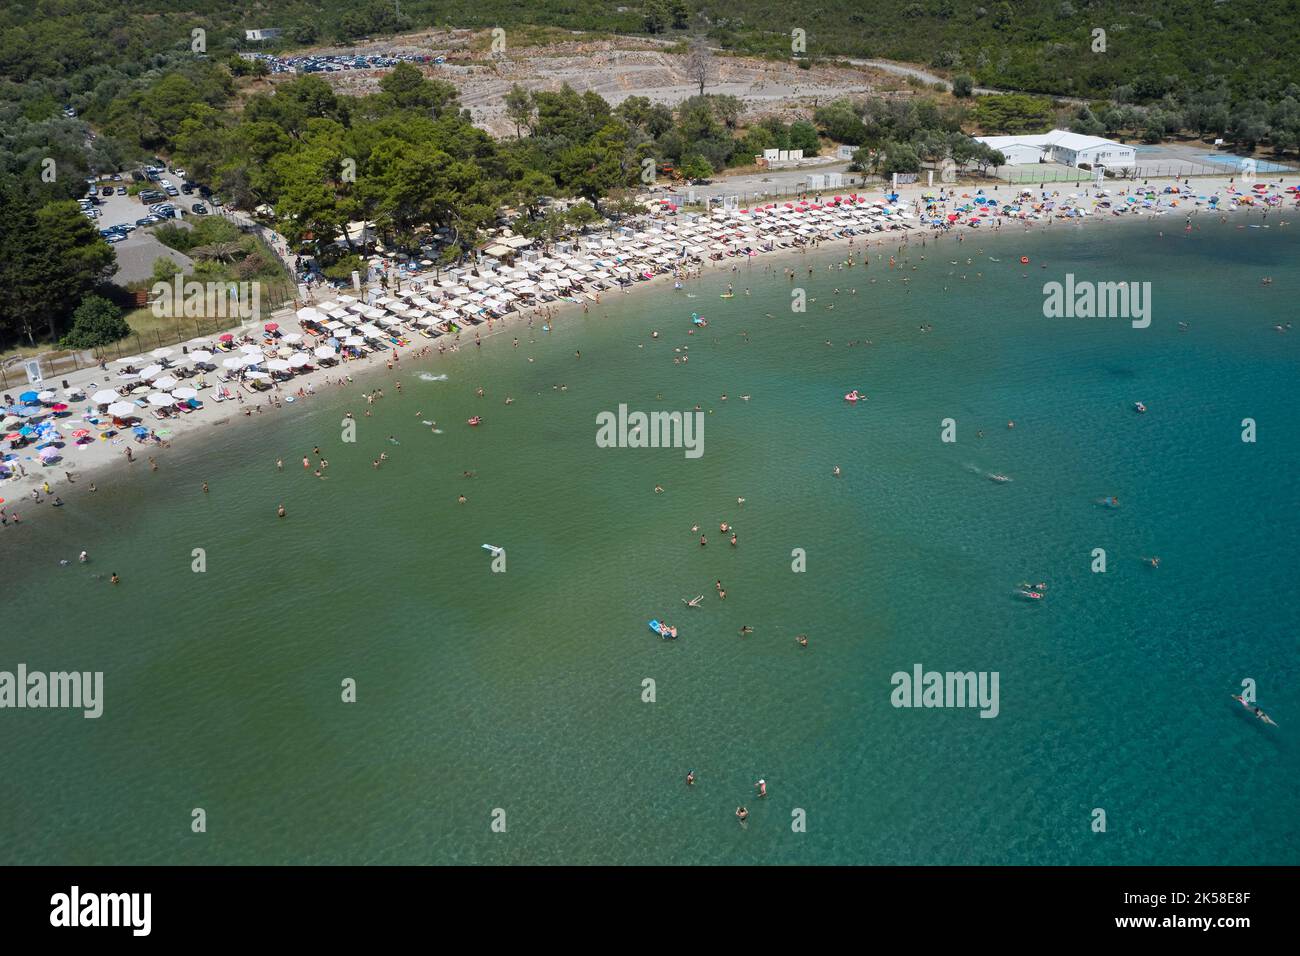 Many people on the beach in montenegro, aerial view. Stock Photo